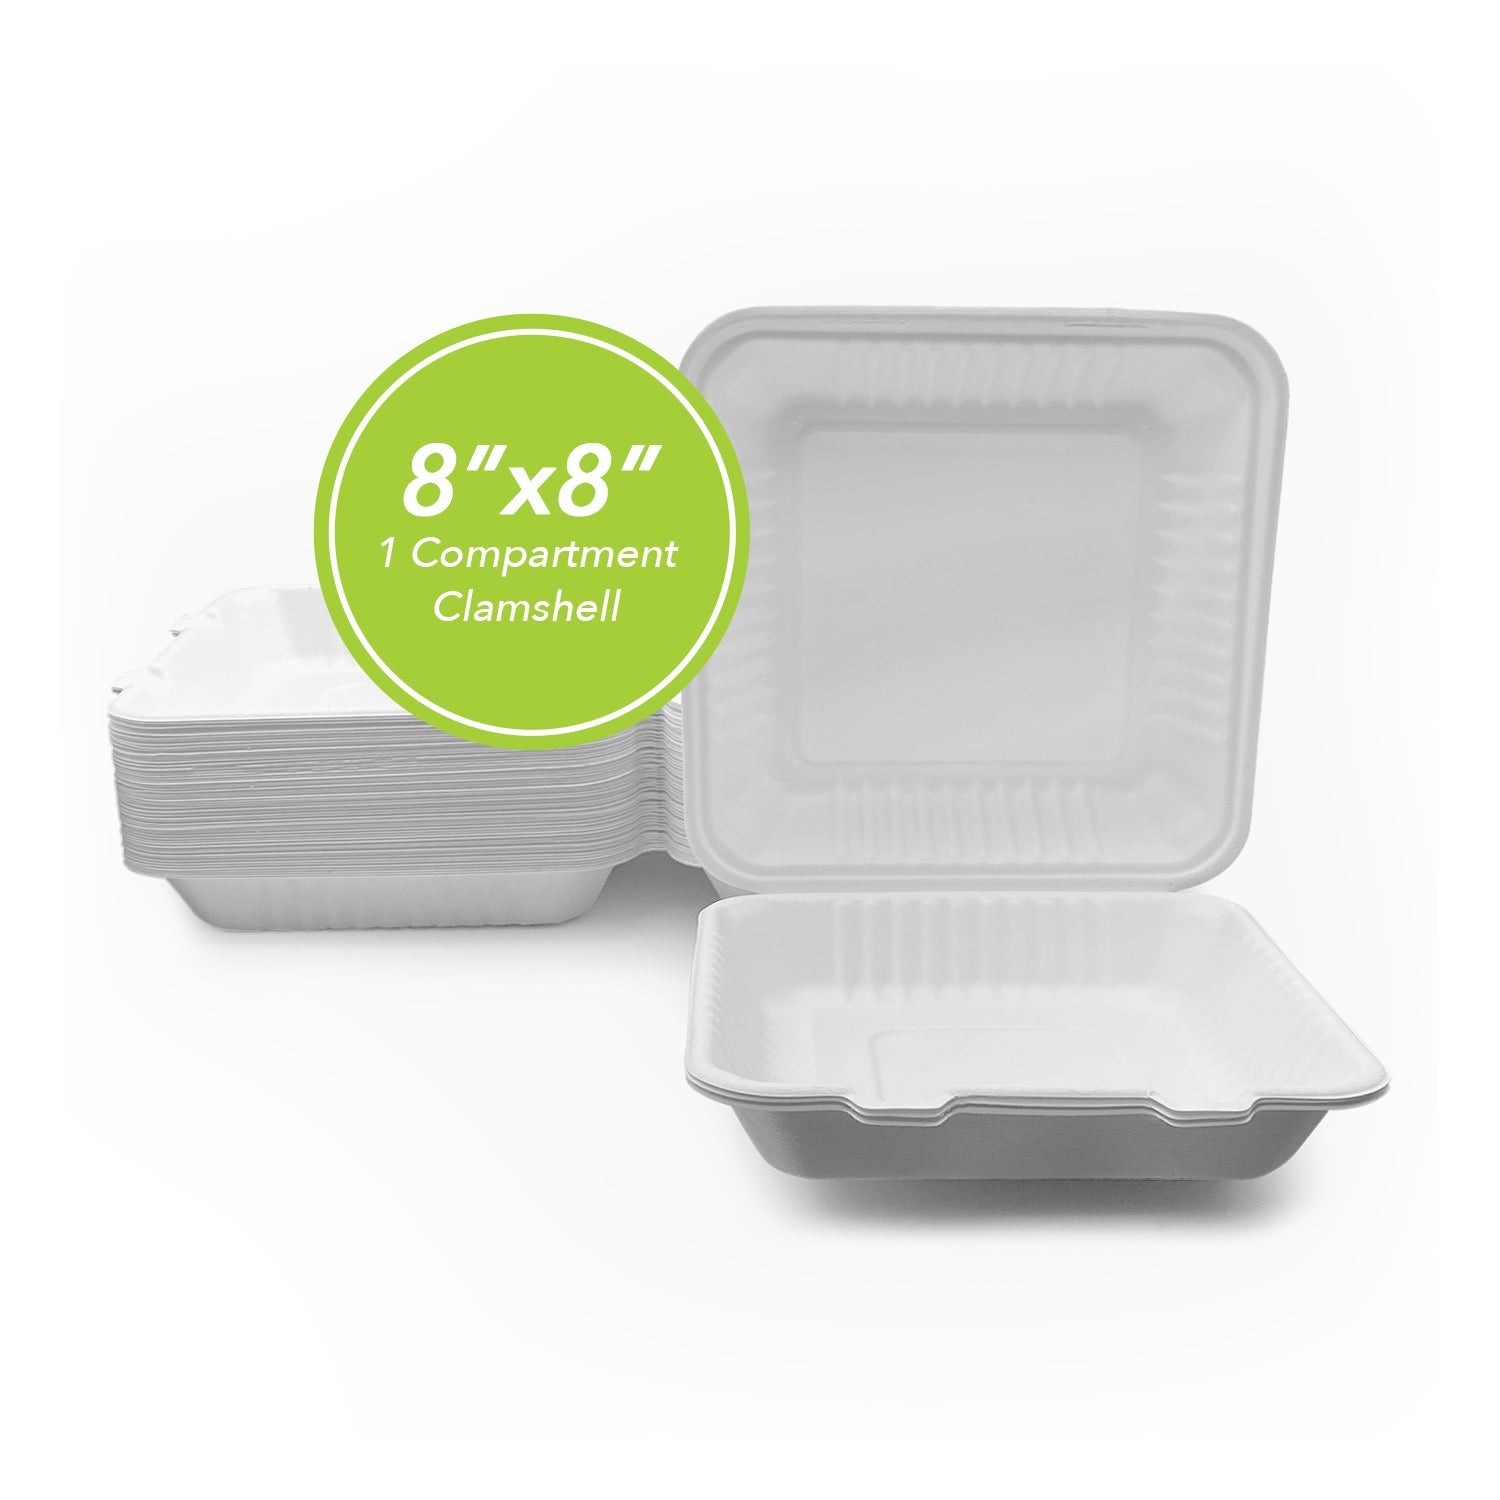 THREE LEAF 8" X 8" 1 COMPARTMENT BAGASSE CLAMSHELL, 200 Ct. (4 PACKS OF 50)